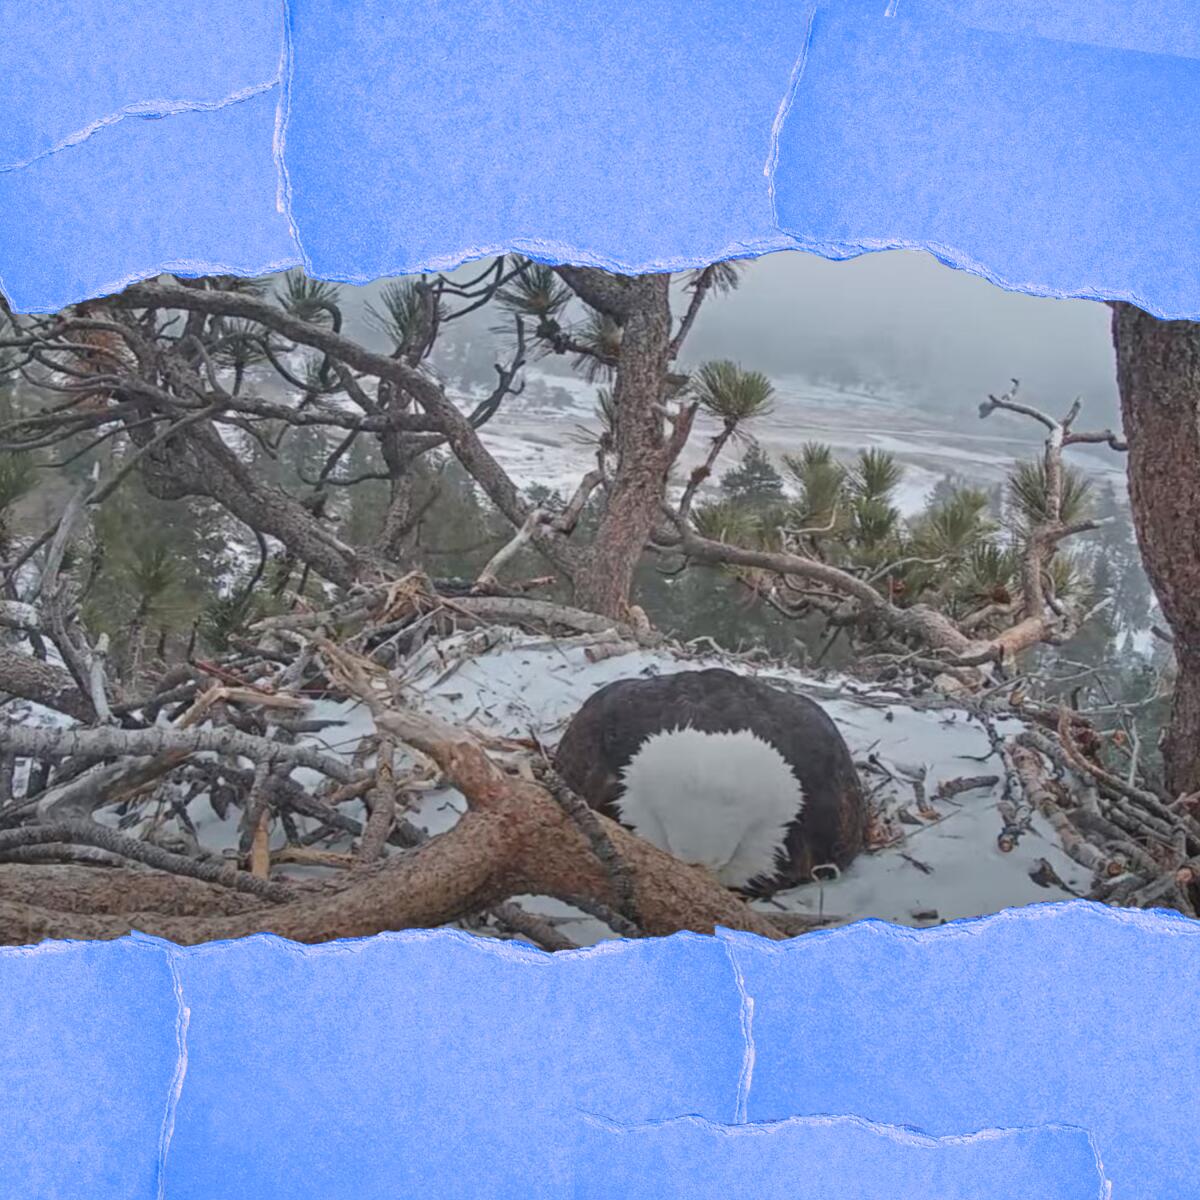 A bald eagle in a snowy nest.